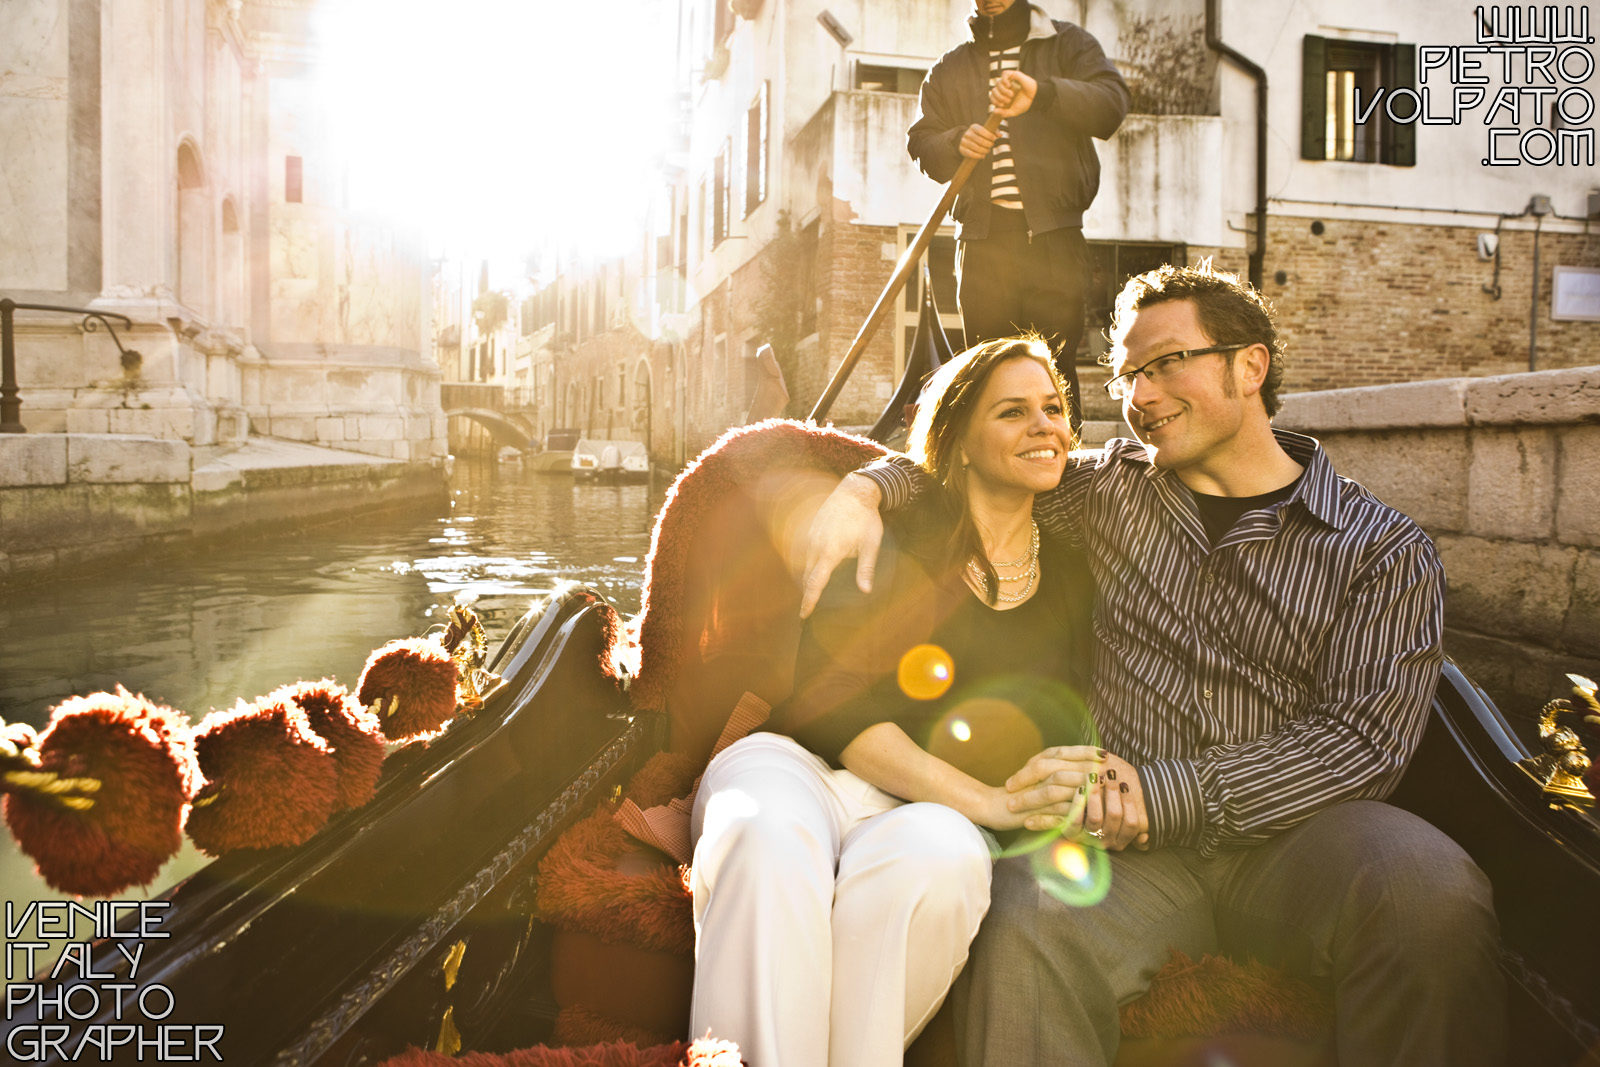 Photographer in Venice Italy for engagement photo shoot and tour for couple on vacation ~ Romantic and fun Venice photo walk